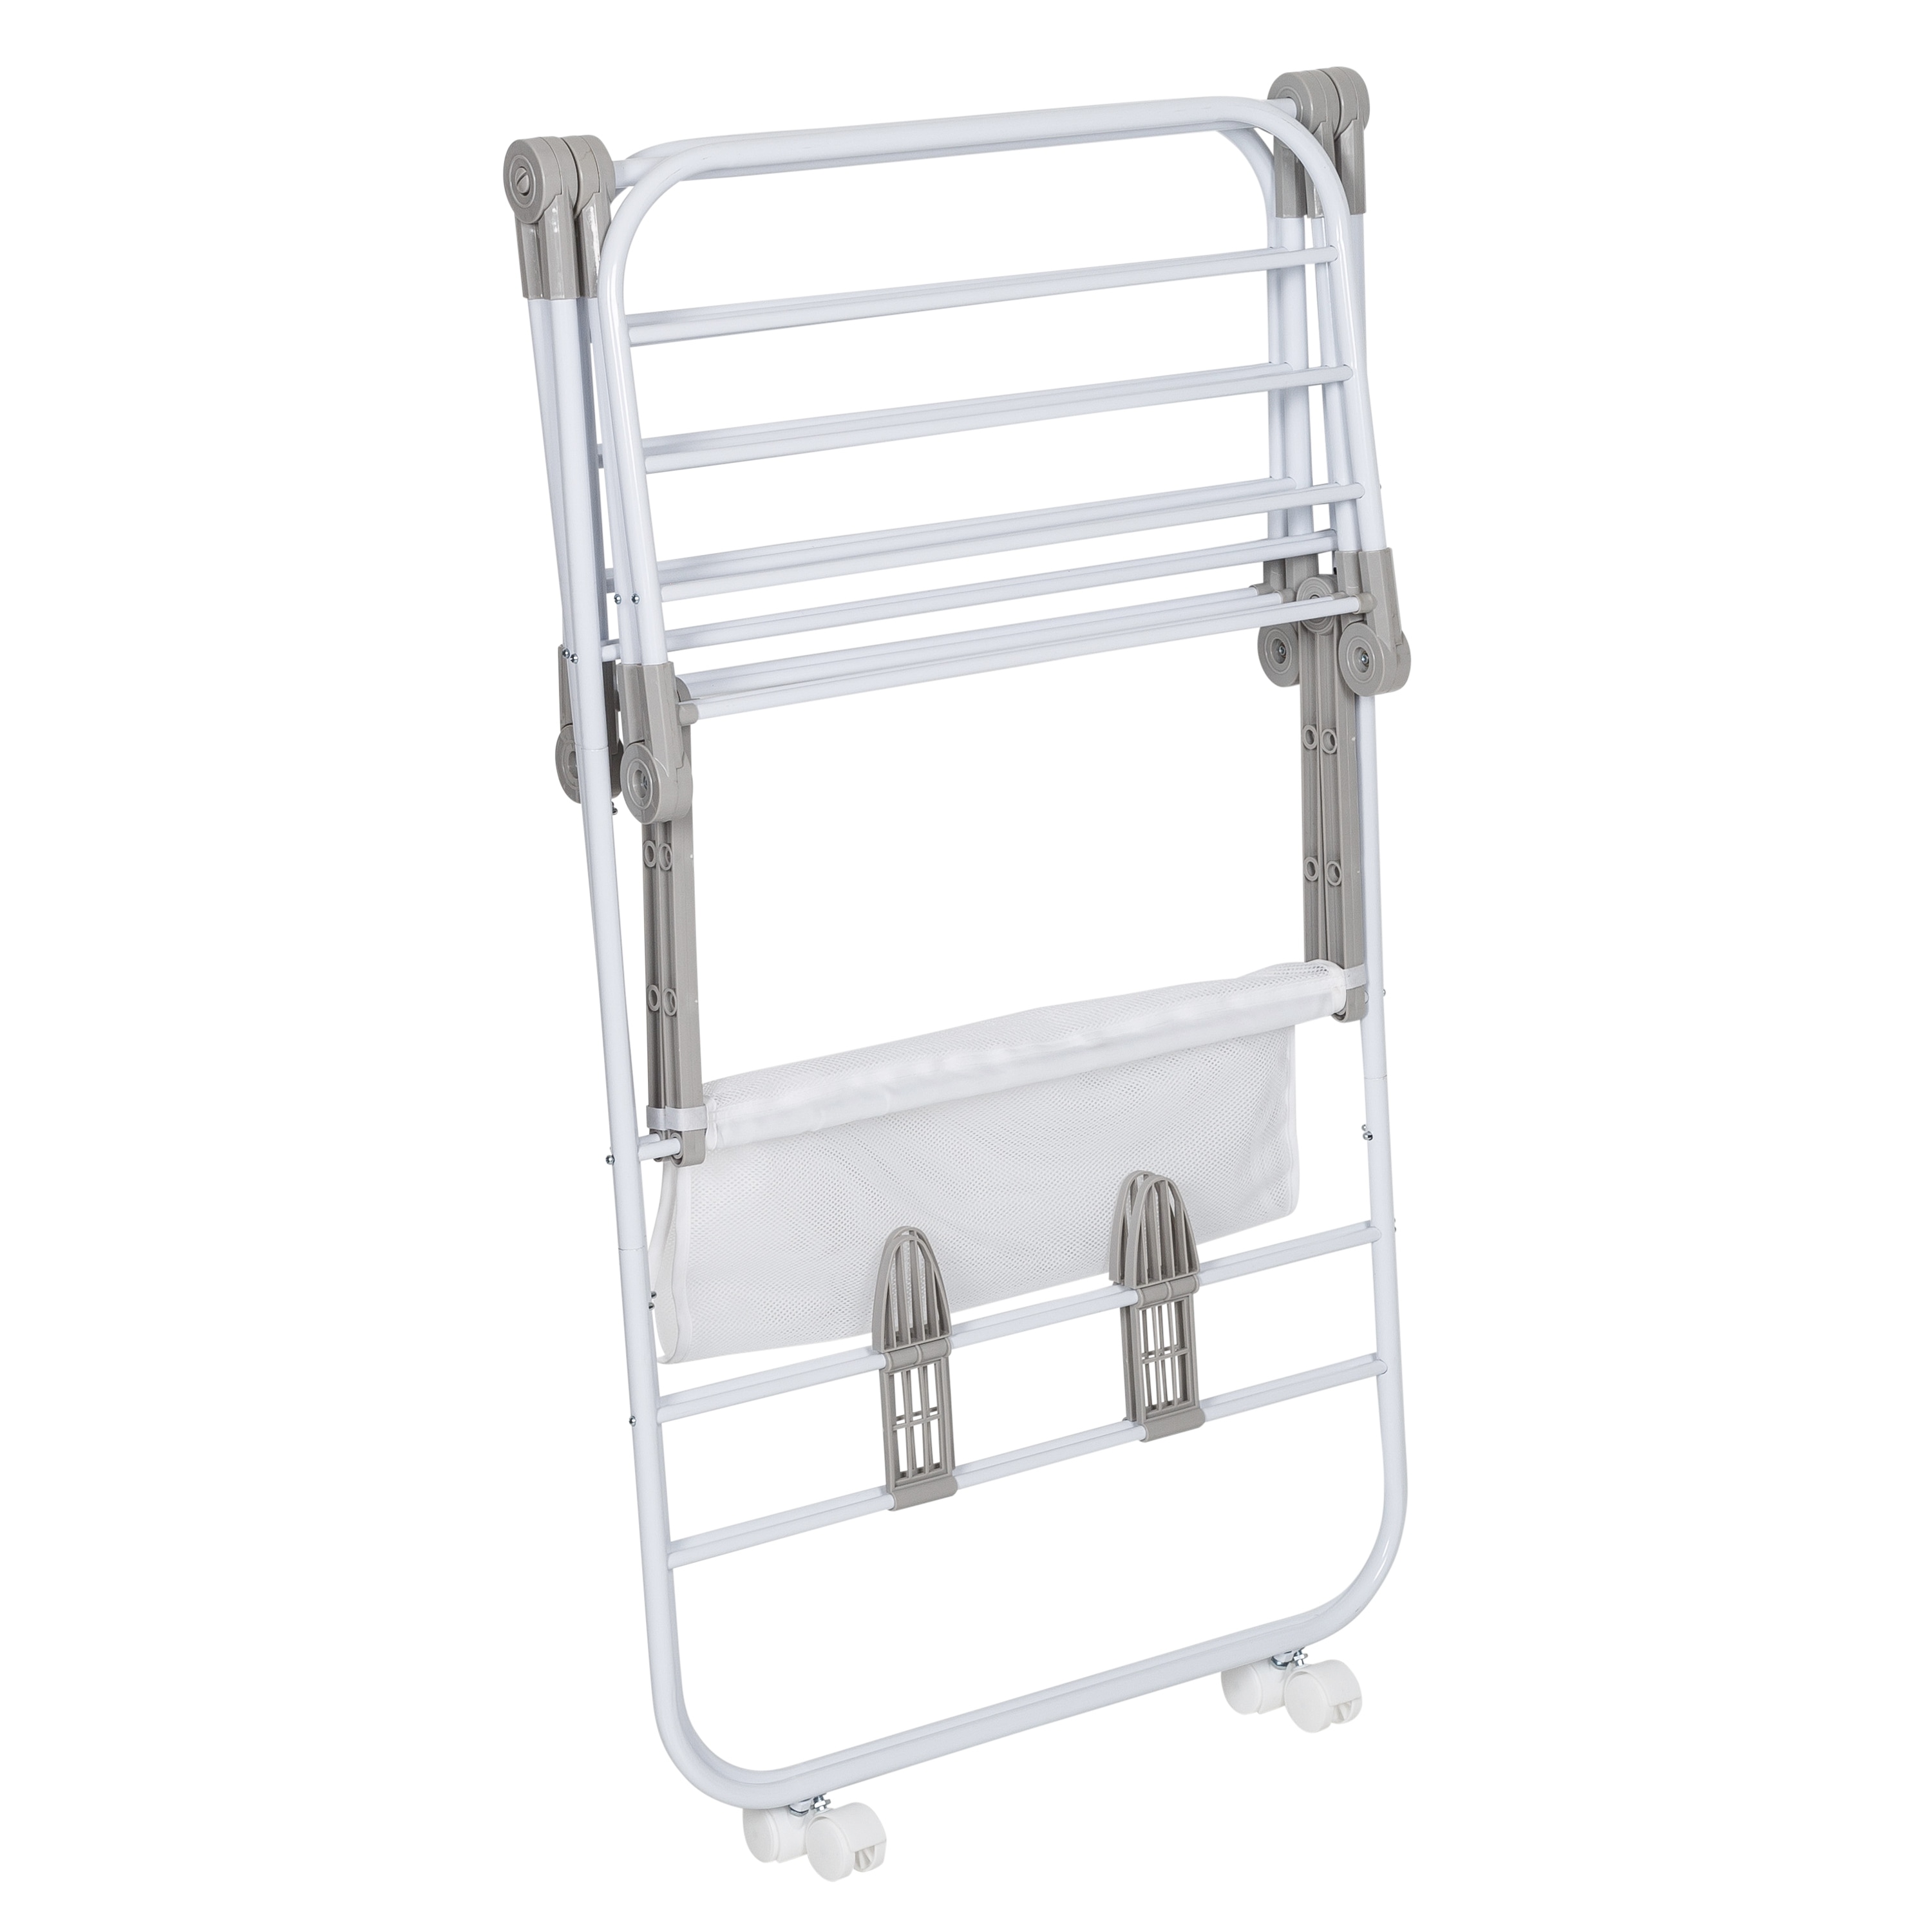 https://ak1.ostkcdn.com/images/products/is/images/direct/7f730f48f69ac0f865c6dba7207aea50dfa0286a/White-Folding-Wing-Clothes-Drying-Rack-with-Wheels.jpg